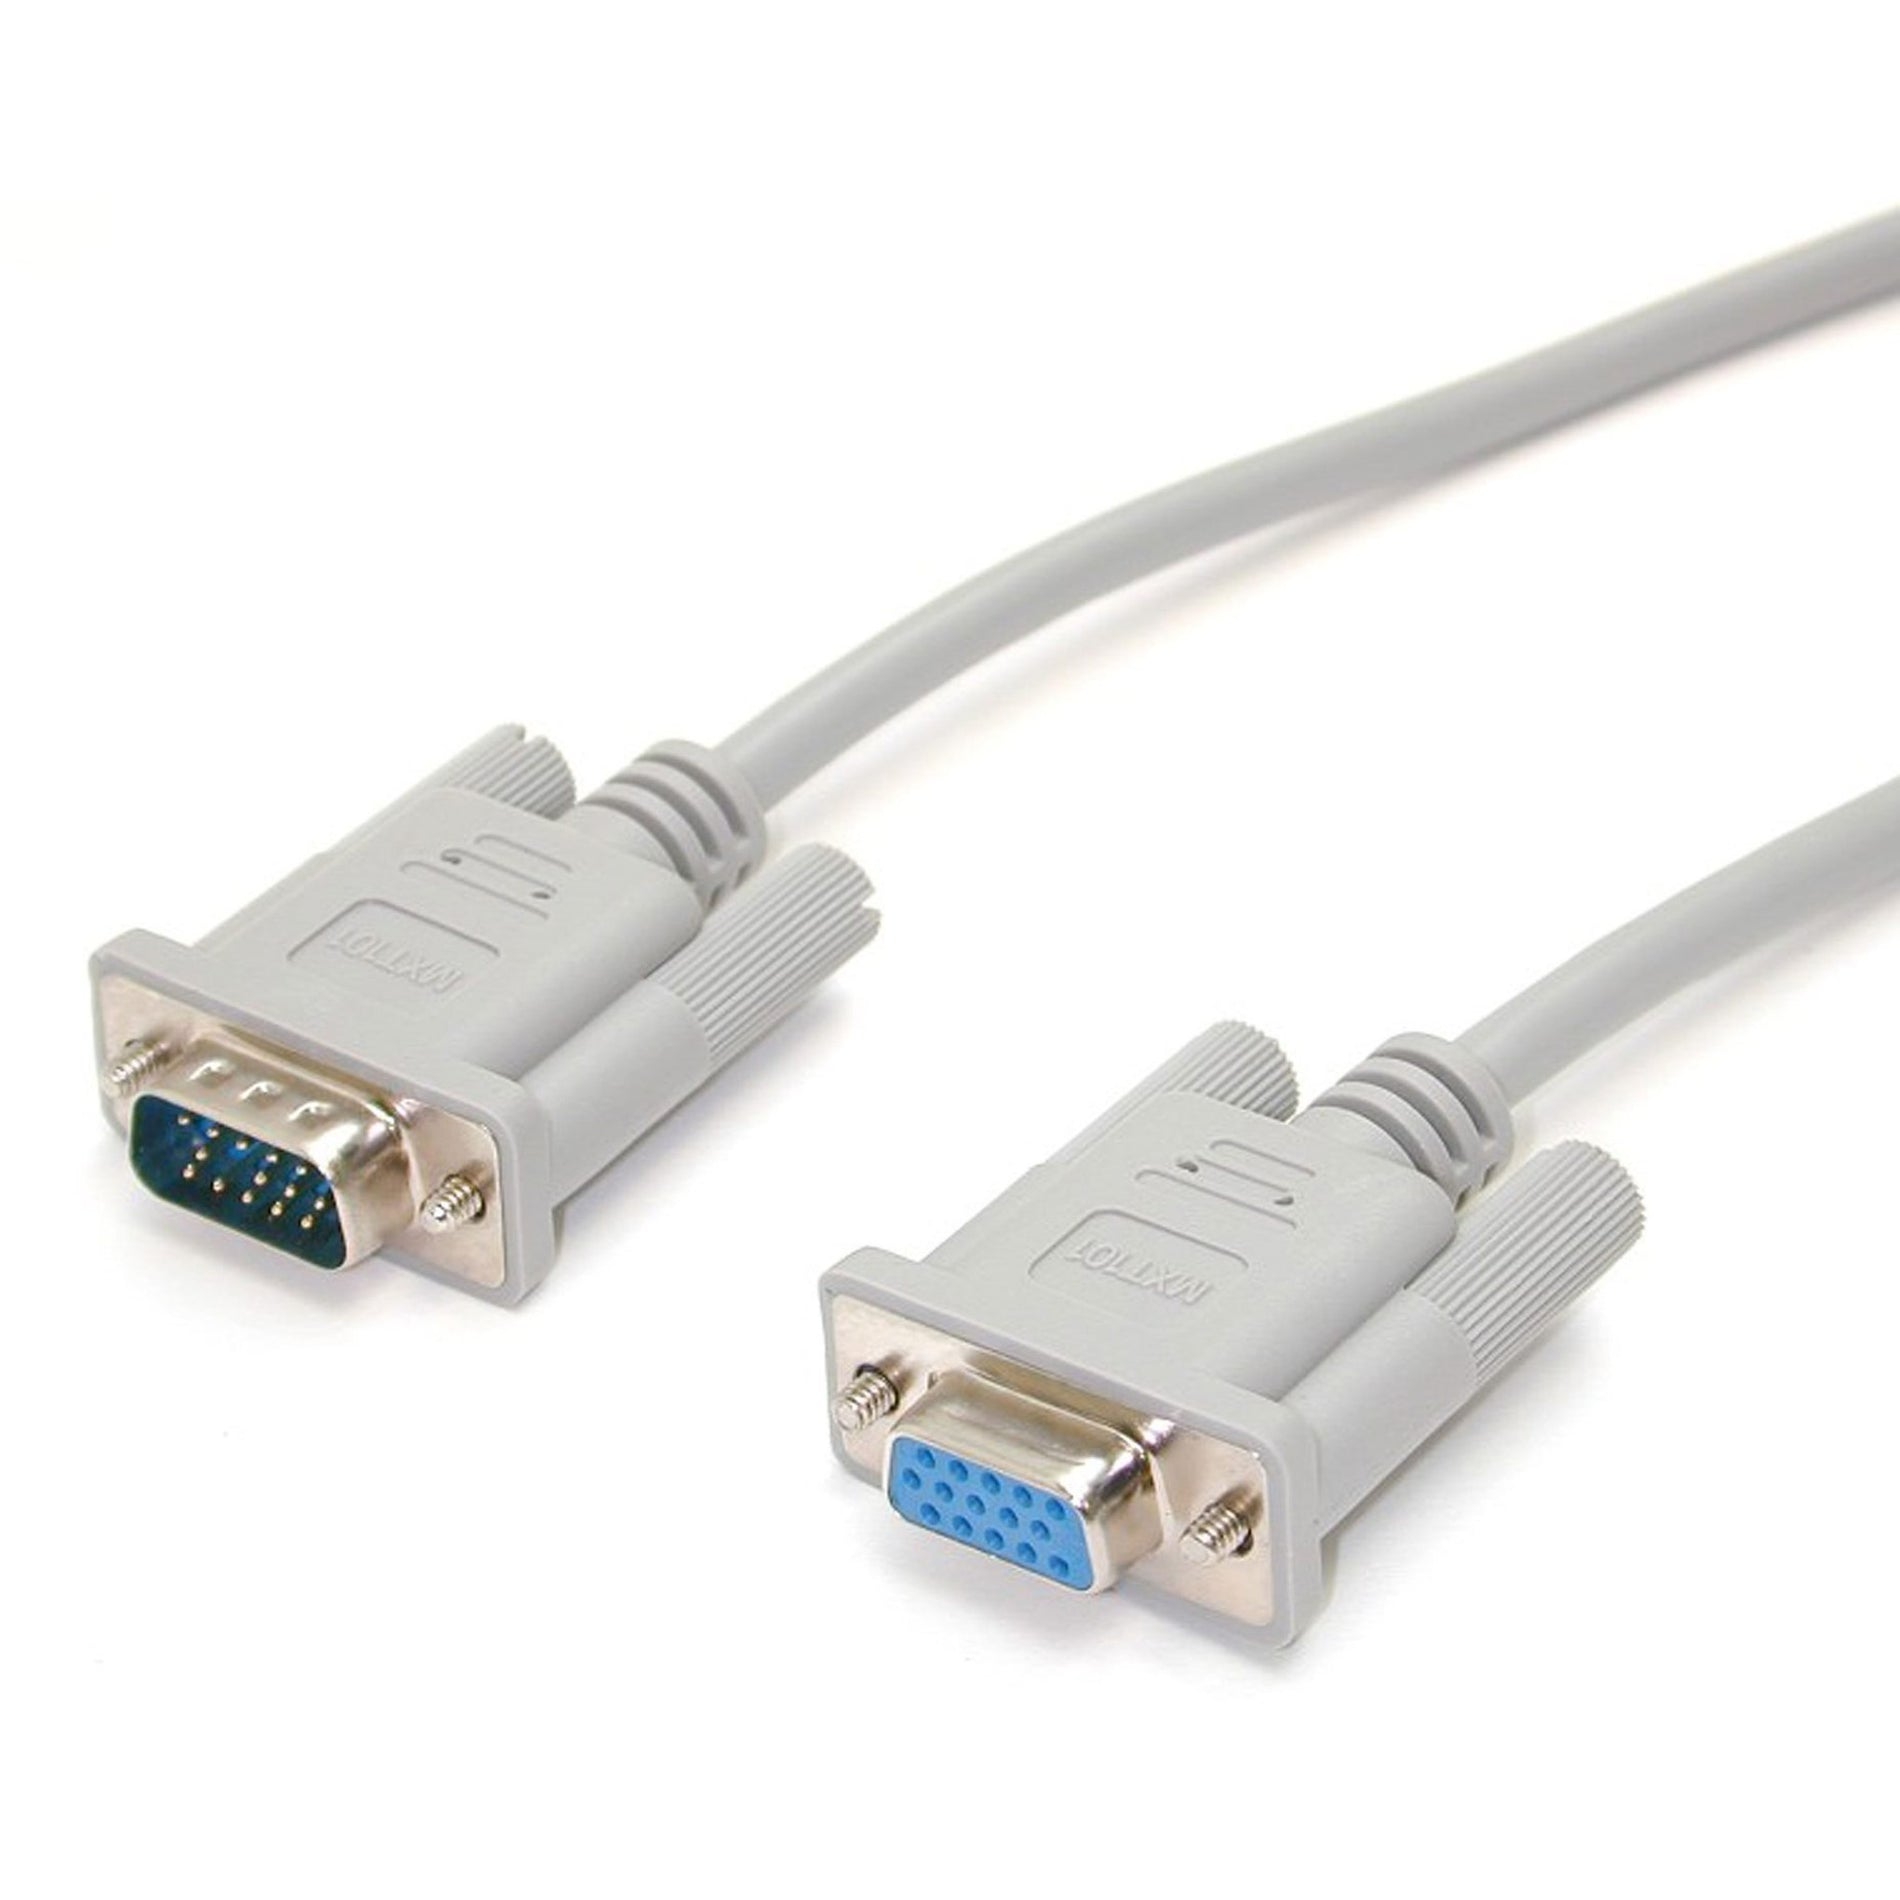 StarTech.com MXT105 15 ft VGA Monitor Extension Cable - HD15 M/F, Copper Conductor, 800 x 600 Supported Resolution